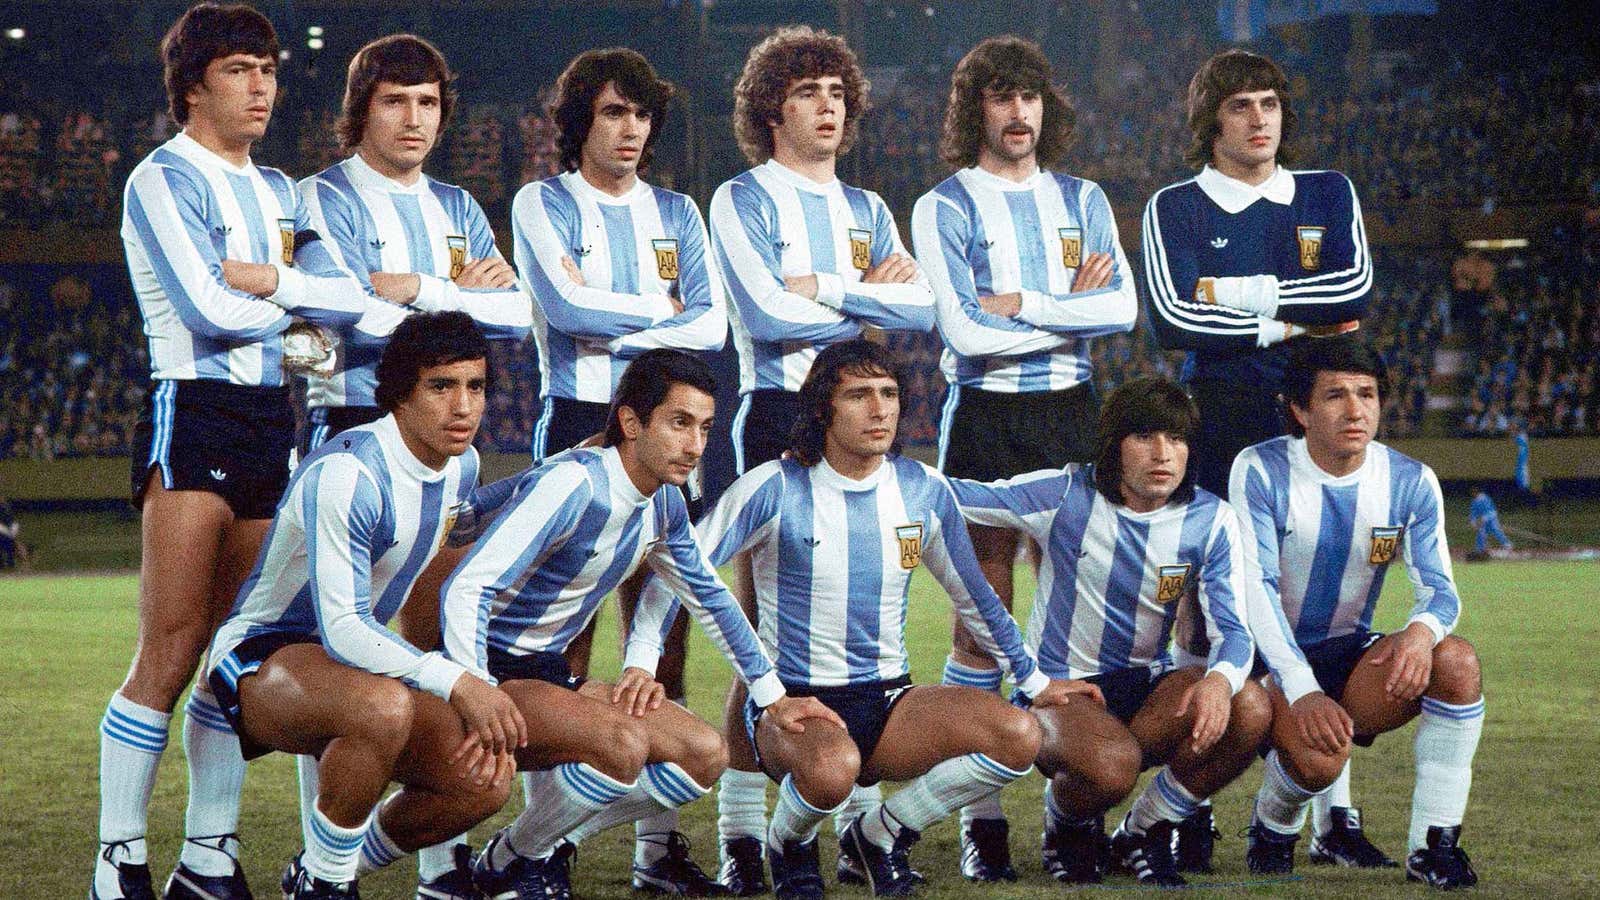 Who wears short shorts? Team Argentina in 1978.